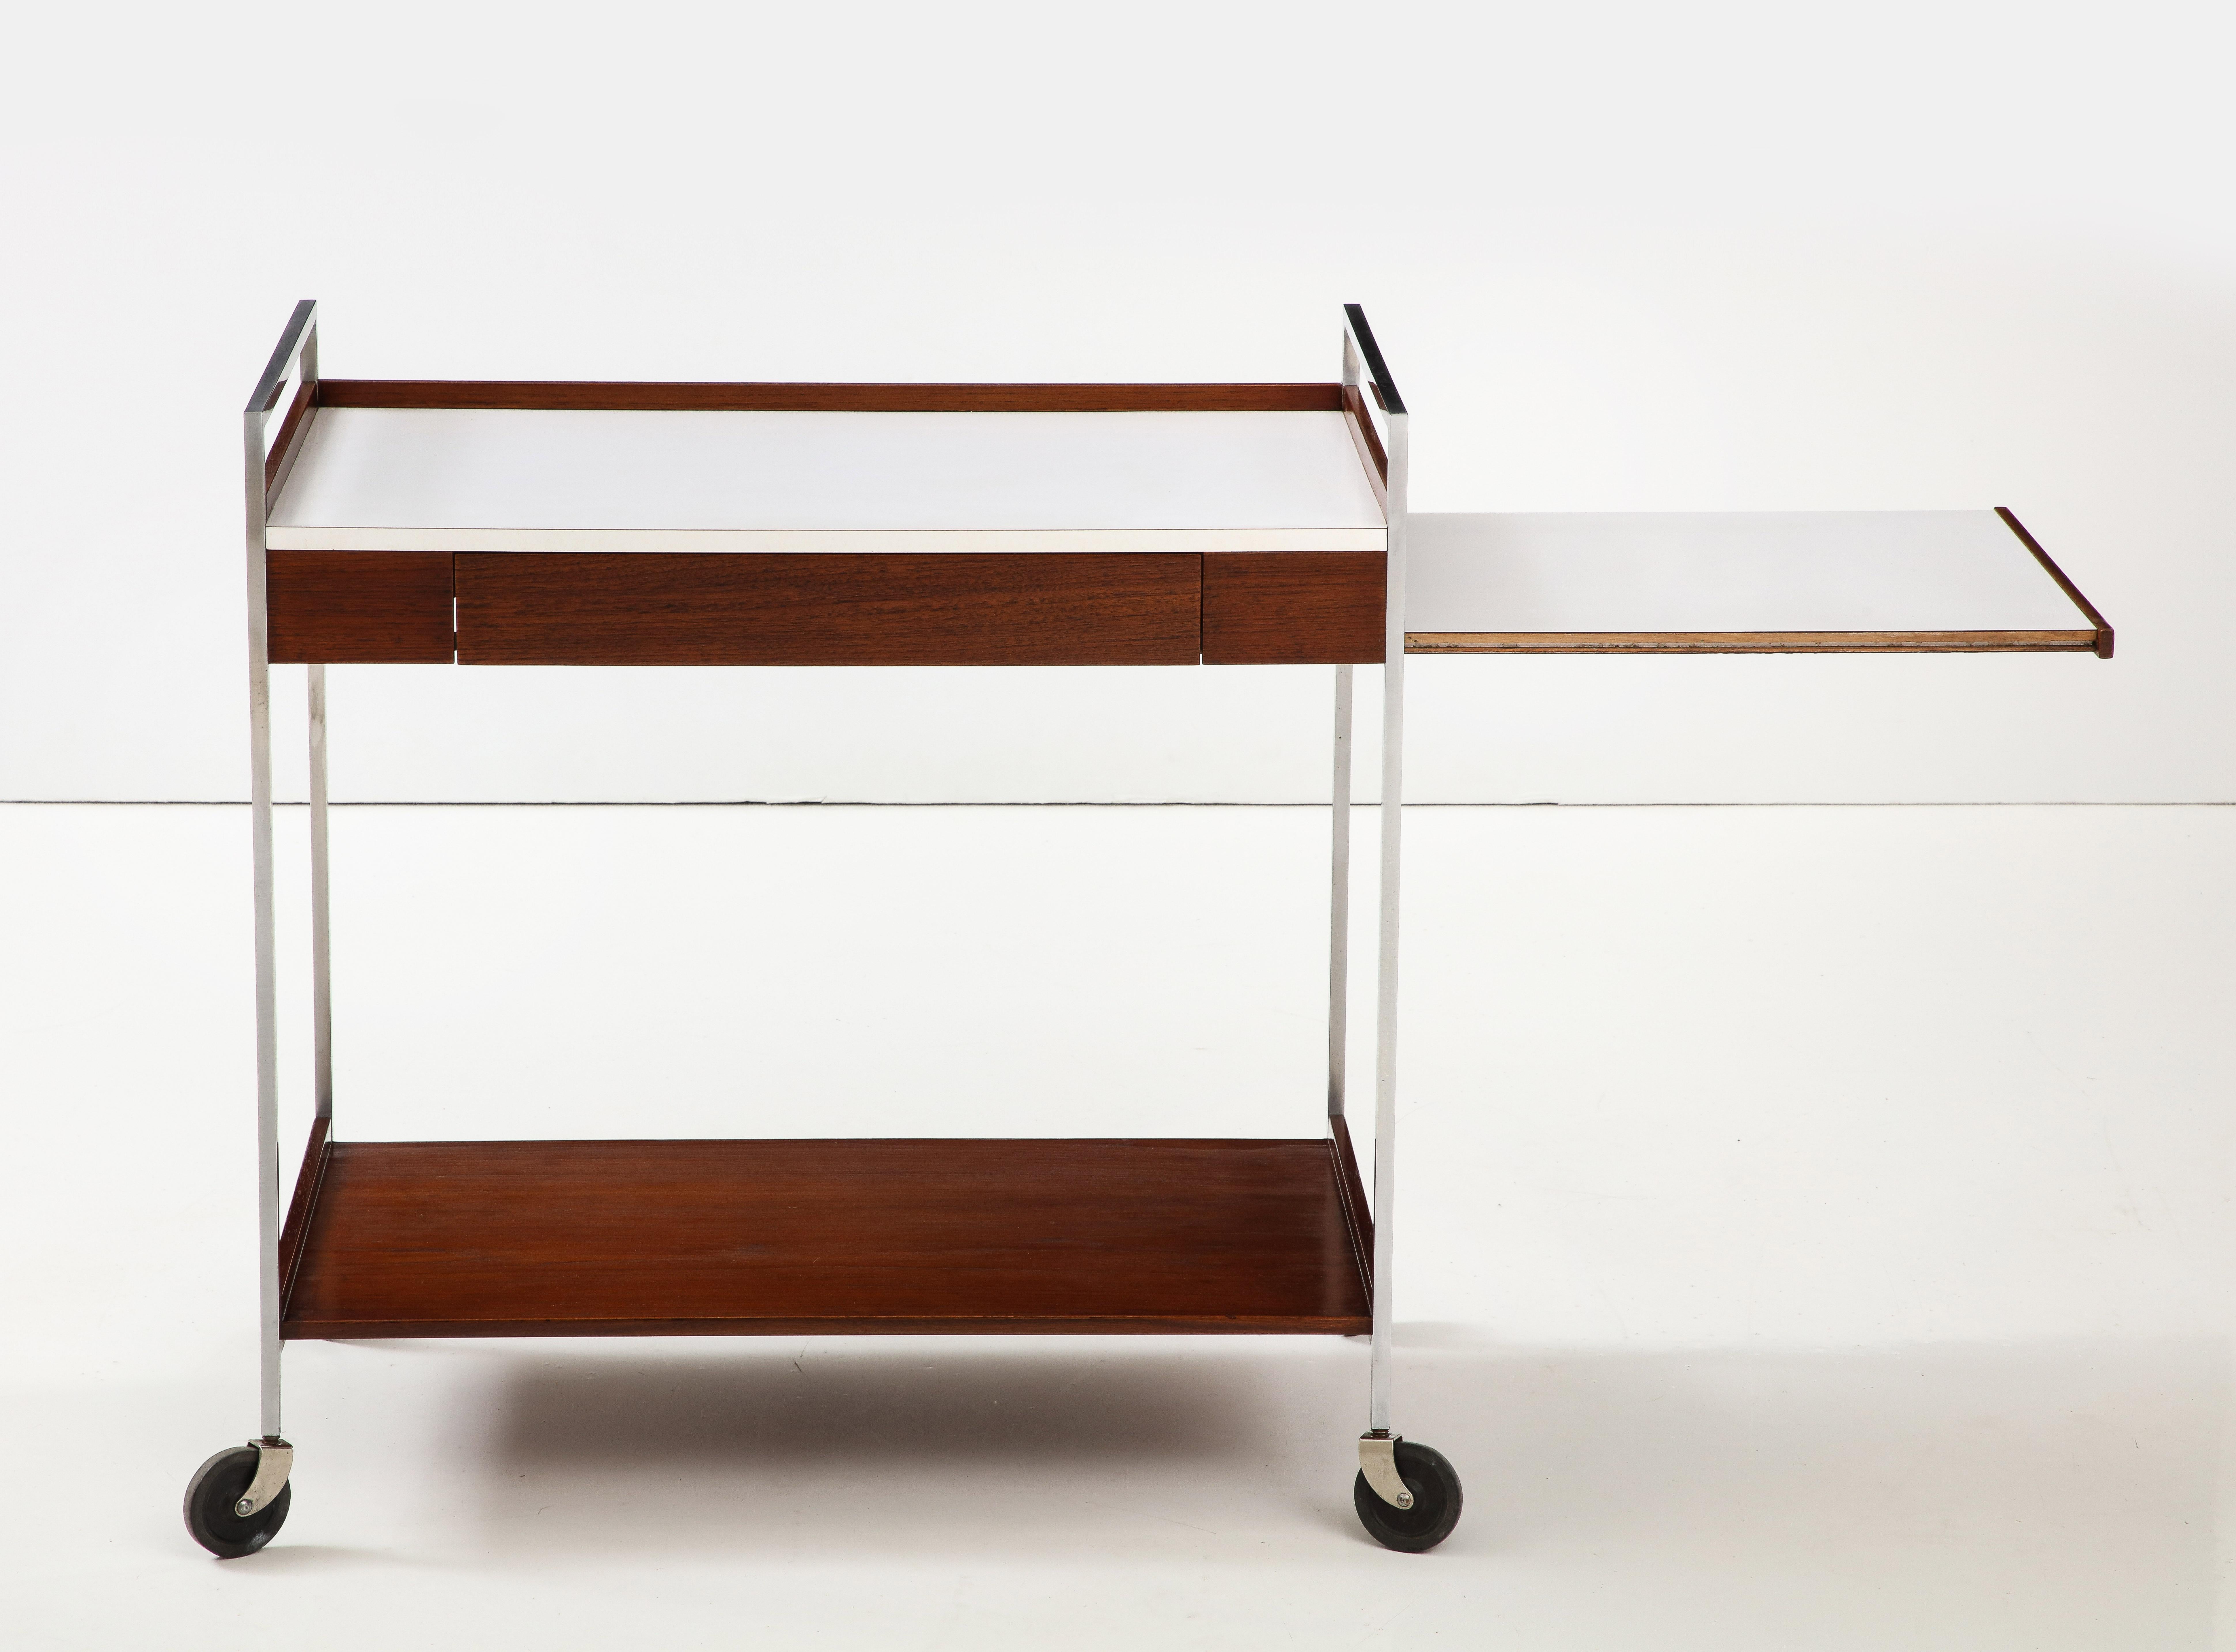 1960's mid-century modern walnut and chrome bar cart designed by George Nelson for Herman Miller, with a single drawer and pull out tray, in vintage condition with minor wear and patina due to age and use, lightly restored.